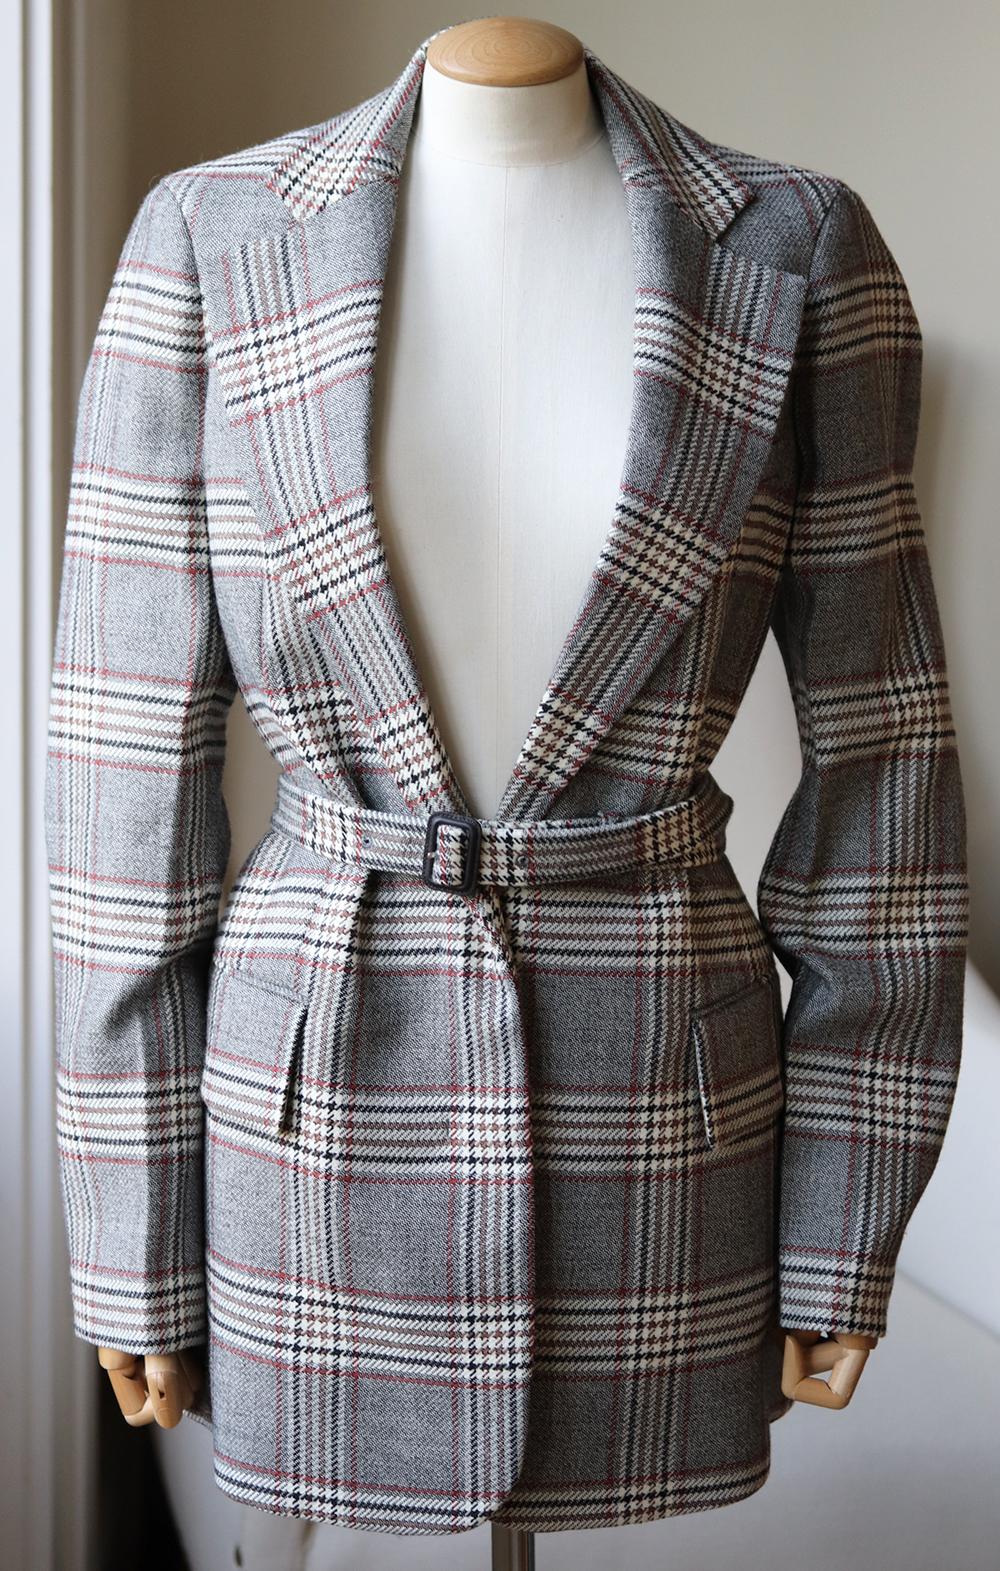 Joseph's classic blazer is patterned with heritage-inspired checks, has oversized pockets and is tailored in cozy wool.
This jacket features a partially concealed, adjustable belt that cinches you in on one side.
Multicoloured wool.
Button